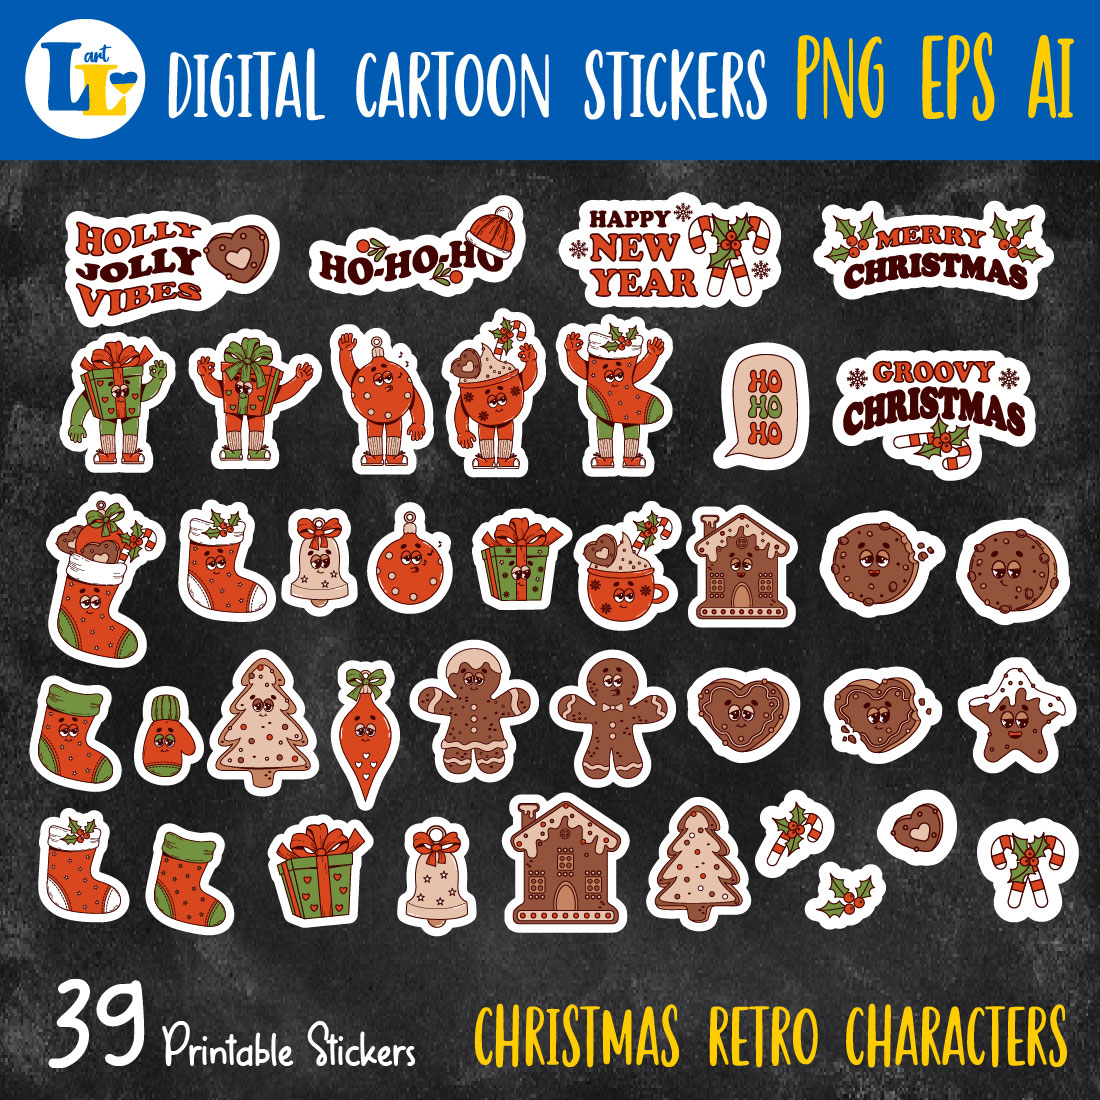 Christmas retro groovy characters| Printable digital sticker cover image.